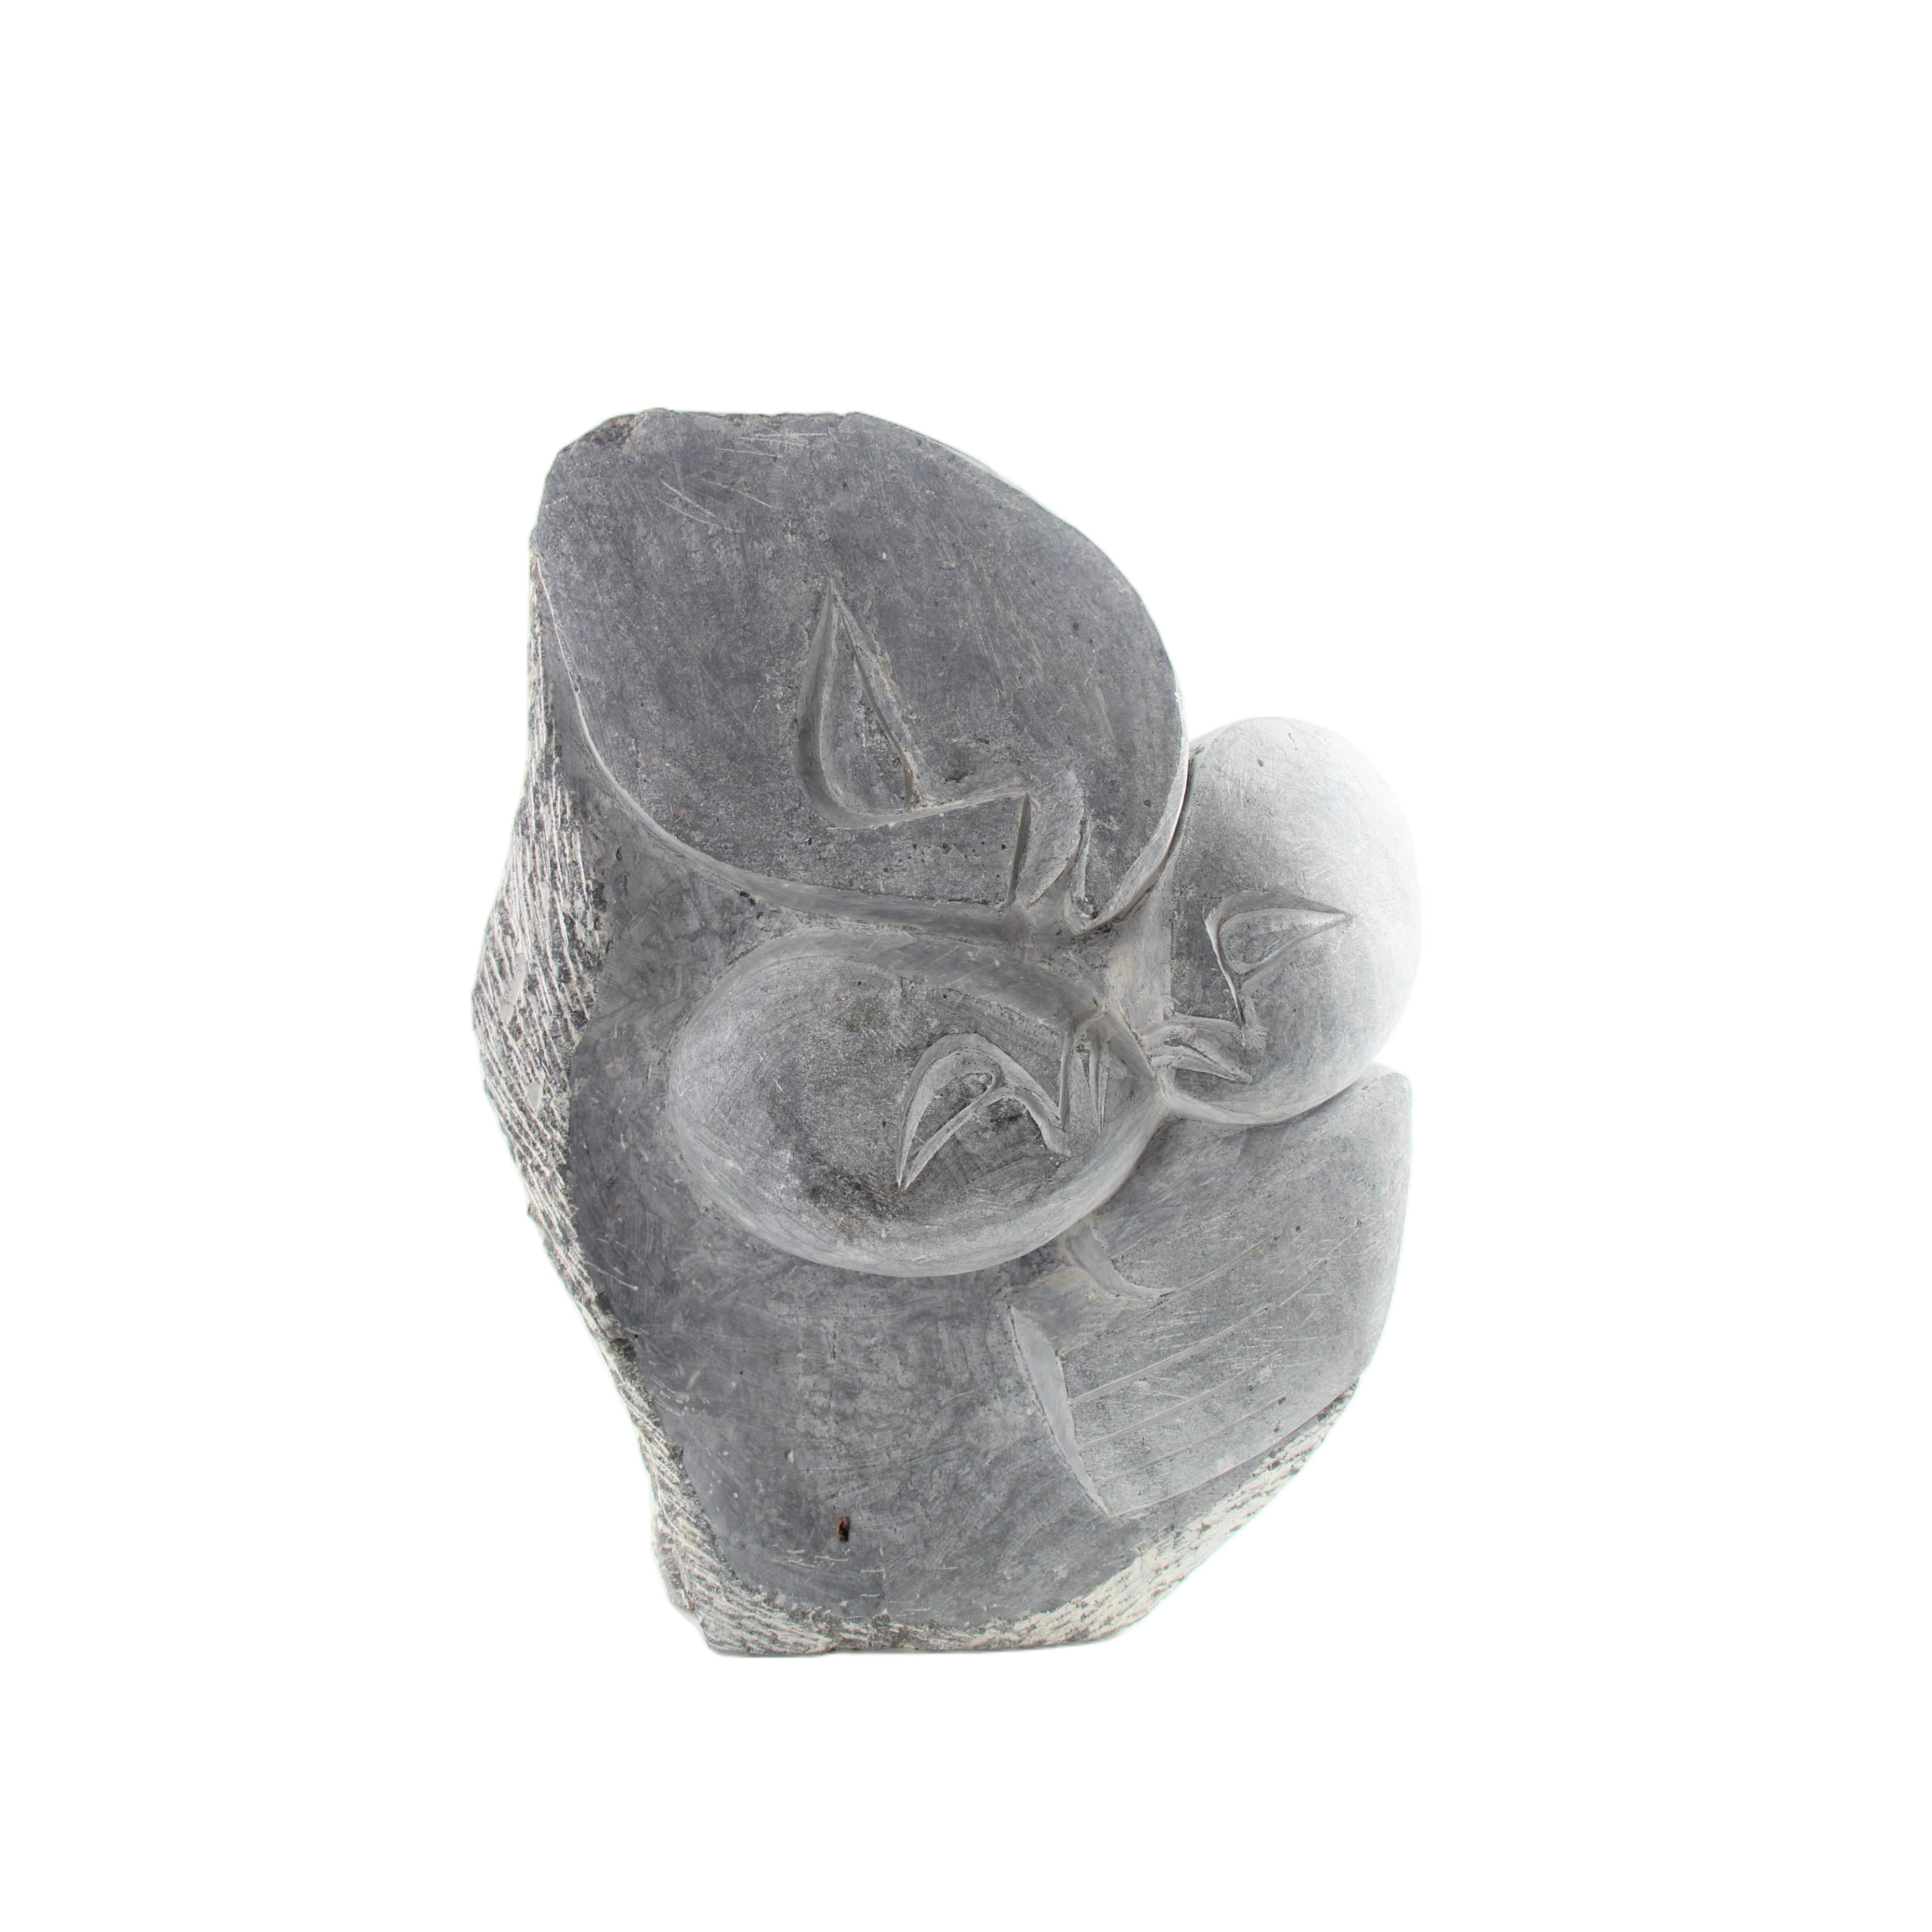 Shona Tribe Serpentine Stone Mother and Children ~11.0" Tall